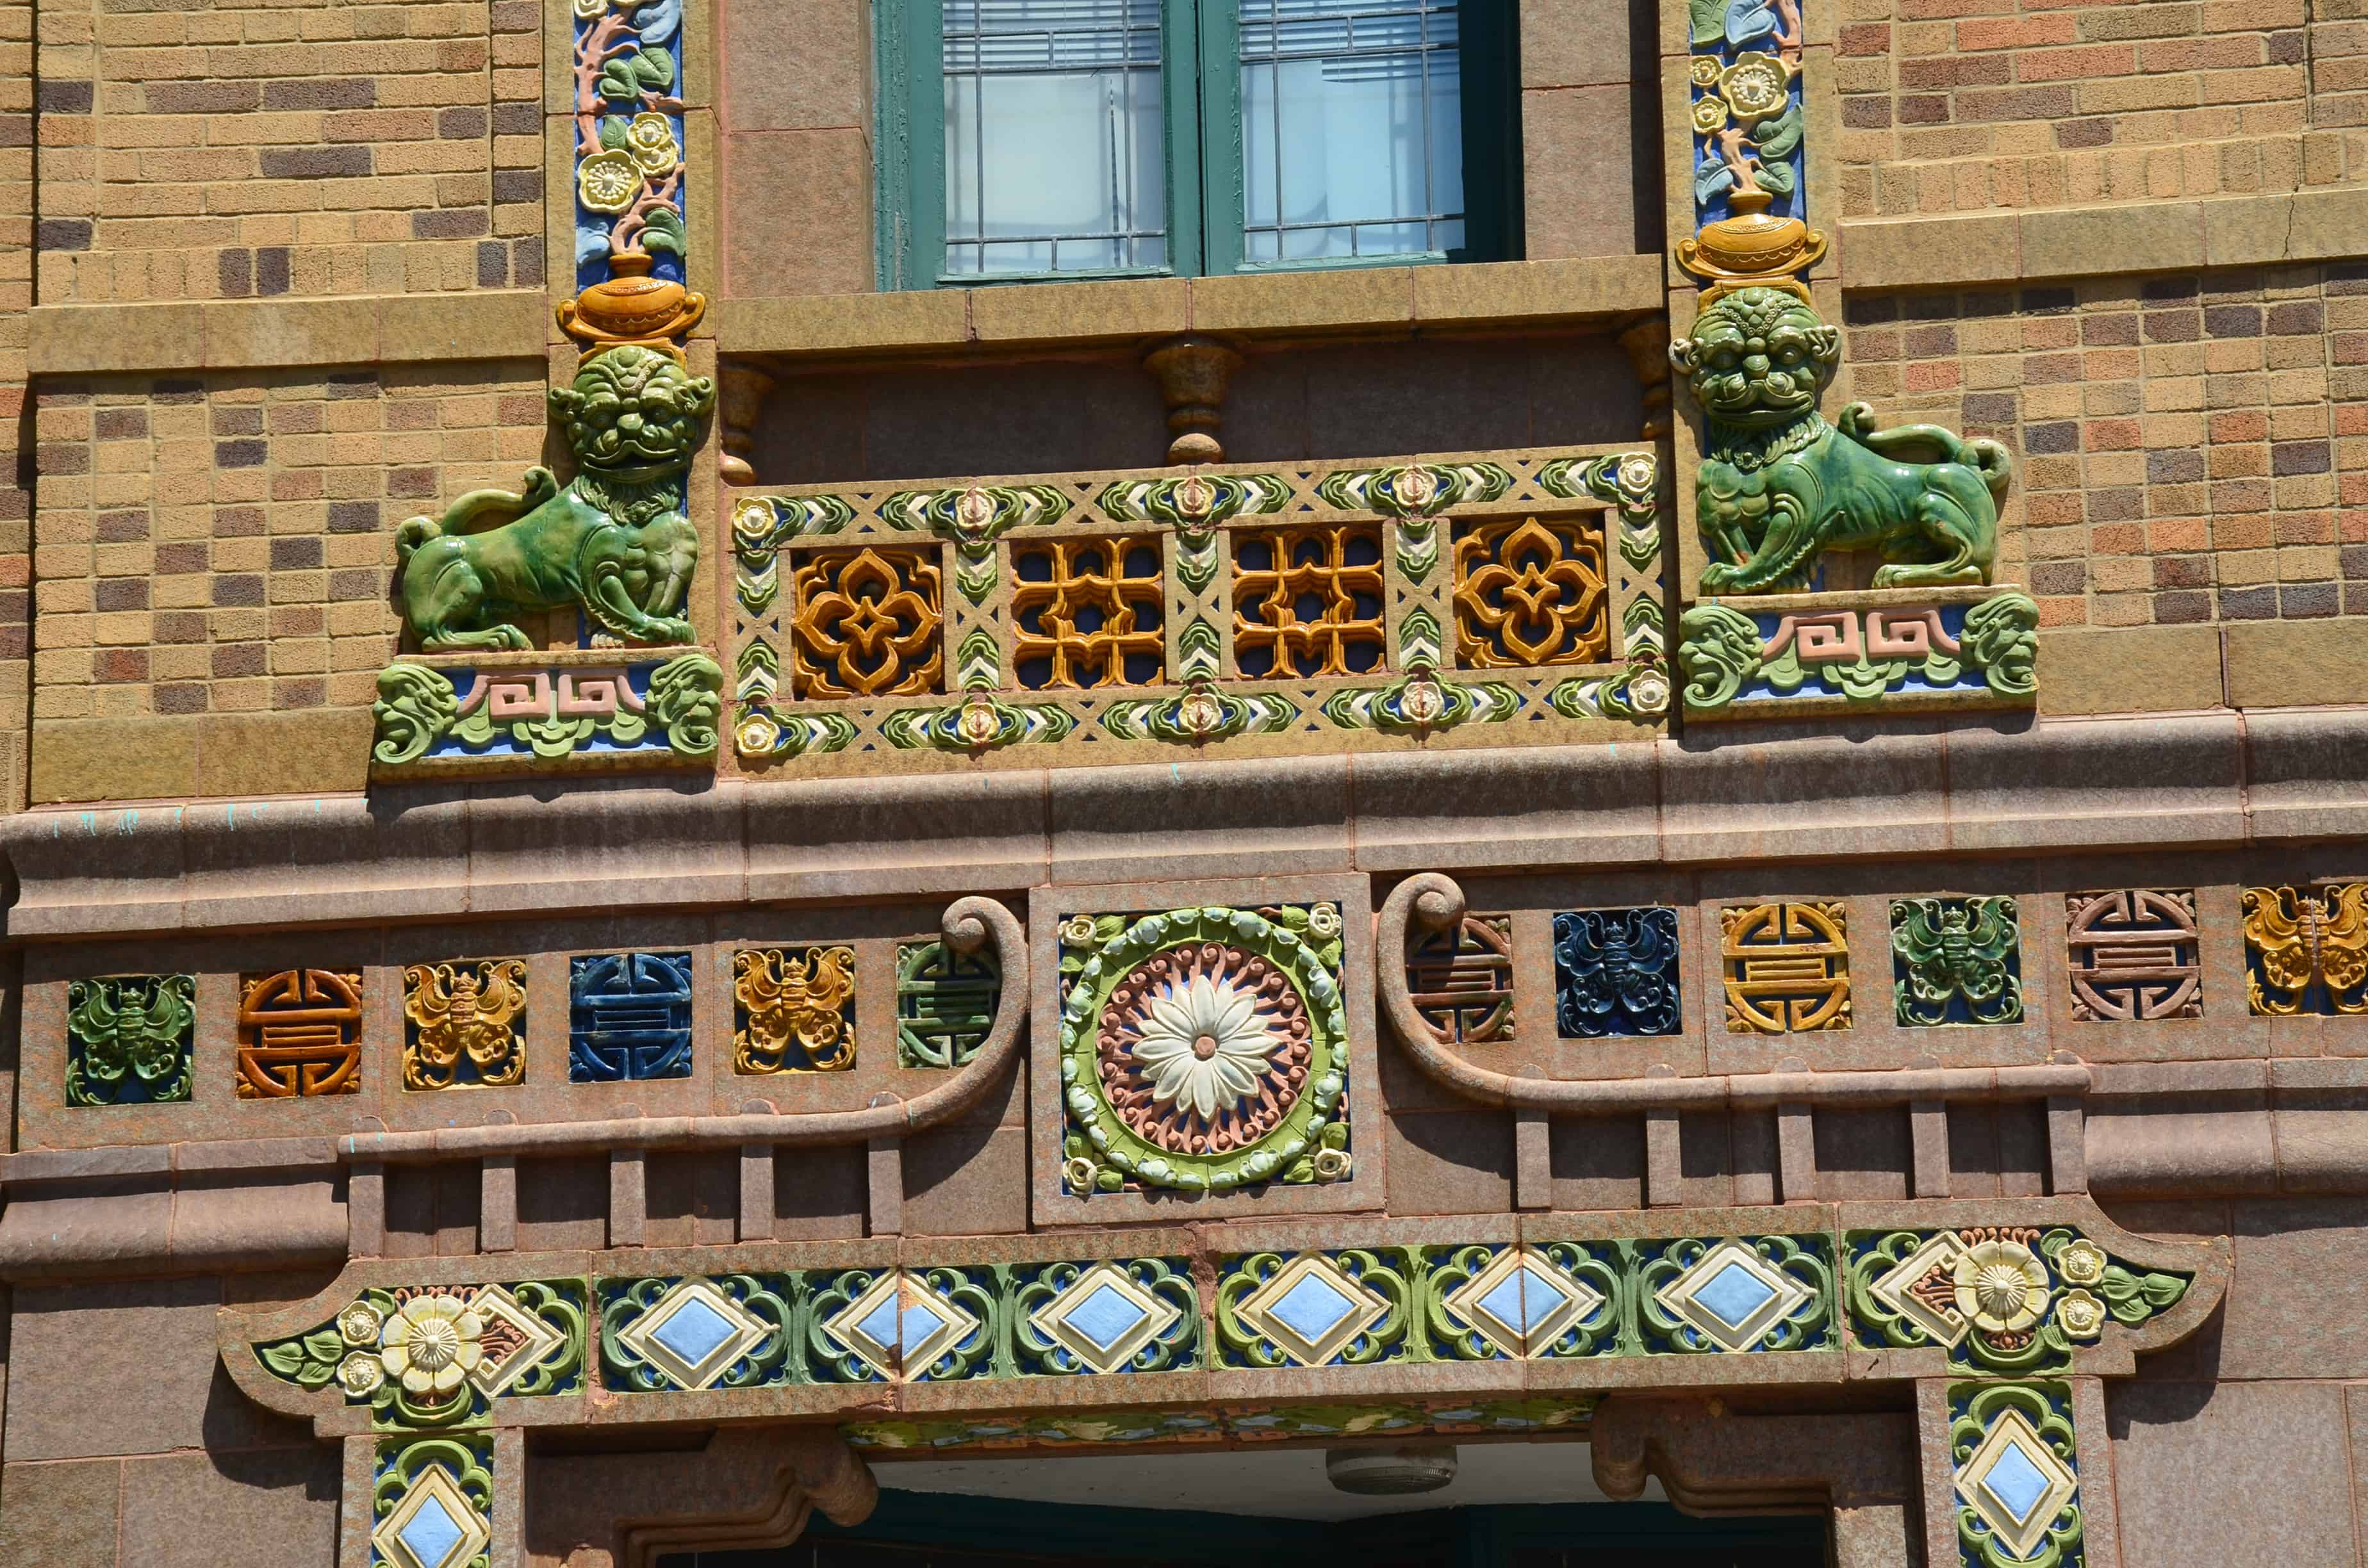 On Leong Building in Chinatown, Chicago, Illinois